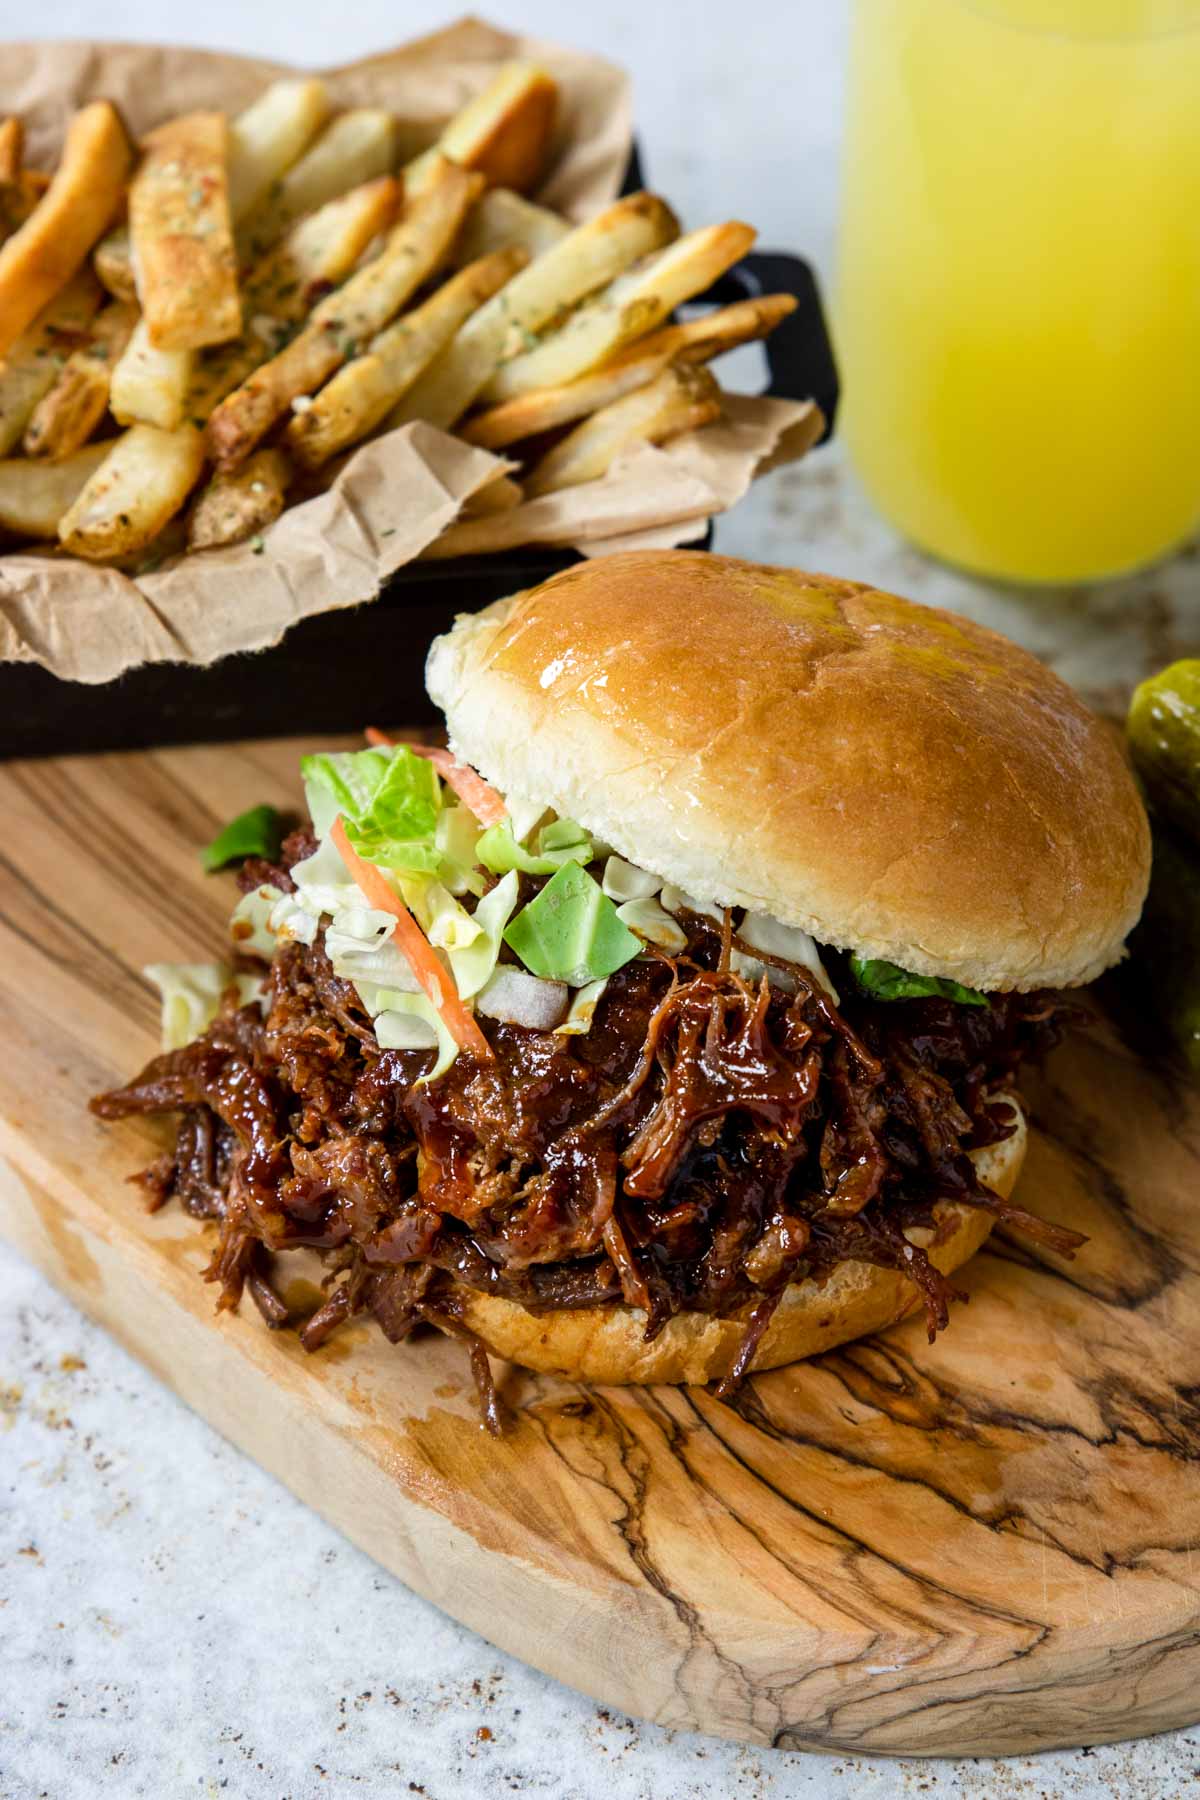 Shredded BBQ Beef Sandwich with fries and a soda